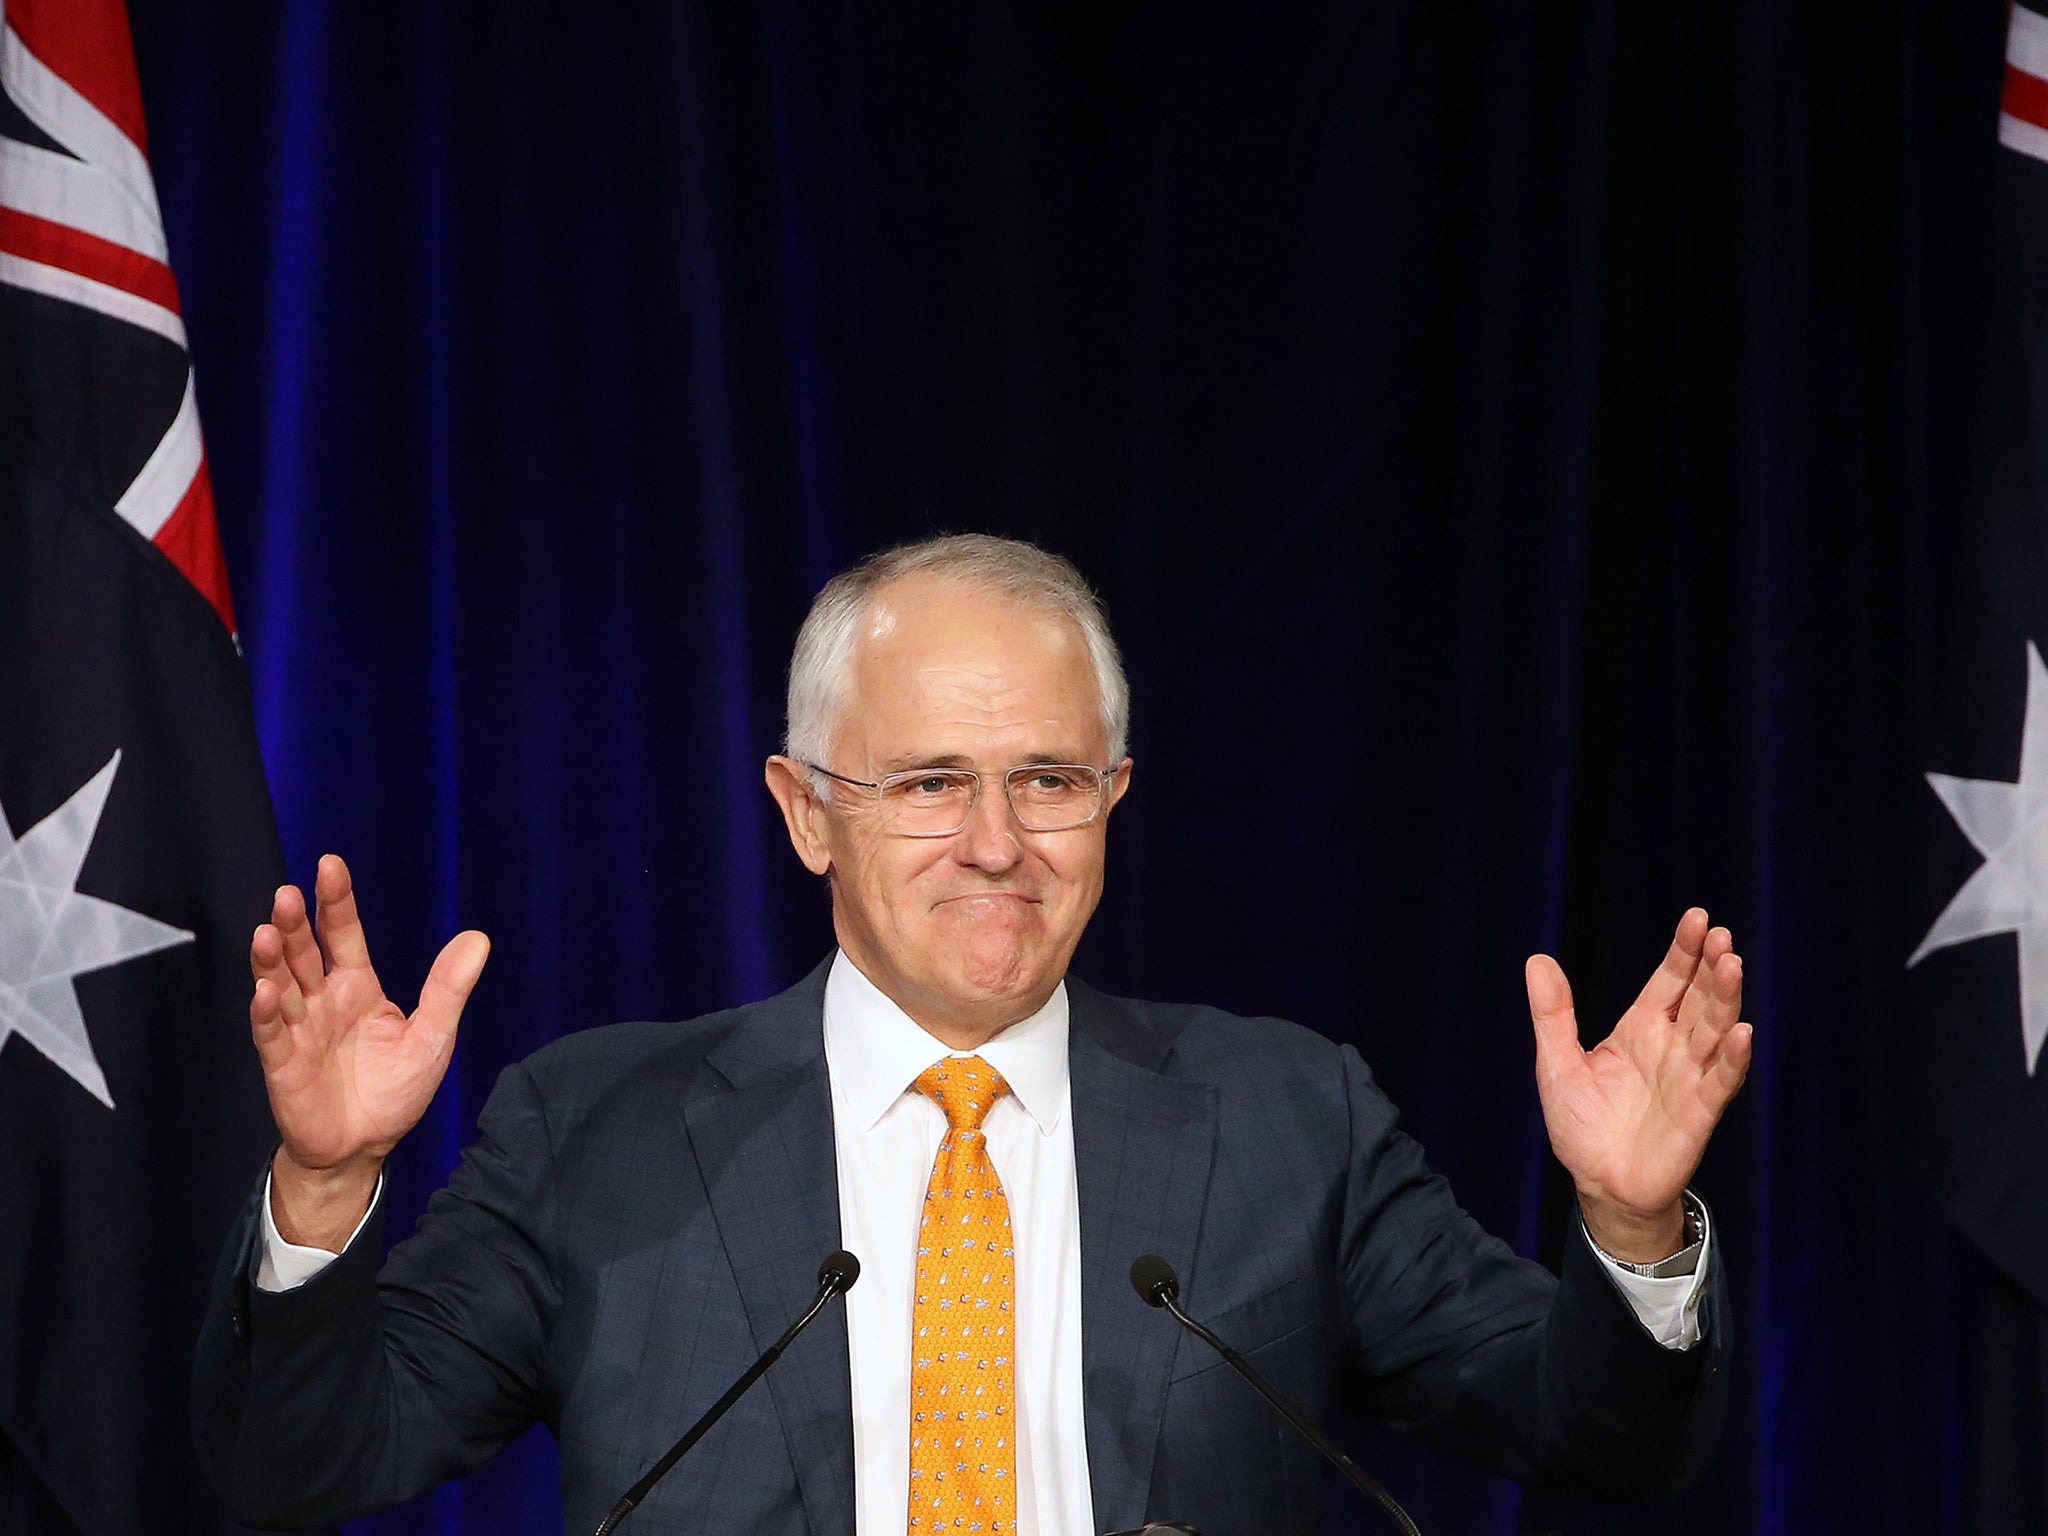 Australian PM Malcolm Turnball has rejected the Chinese purchase of electricity assets in New South Wales